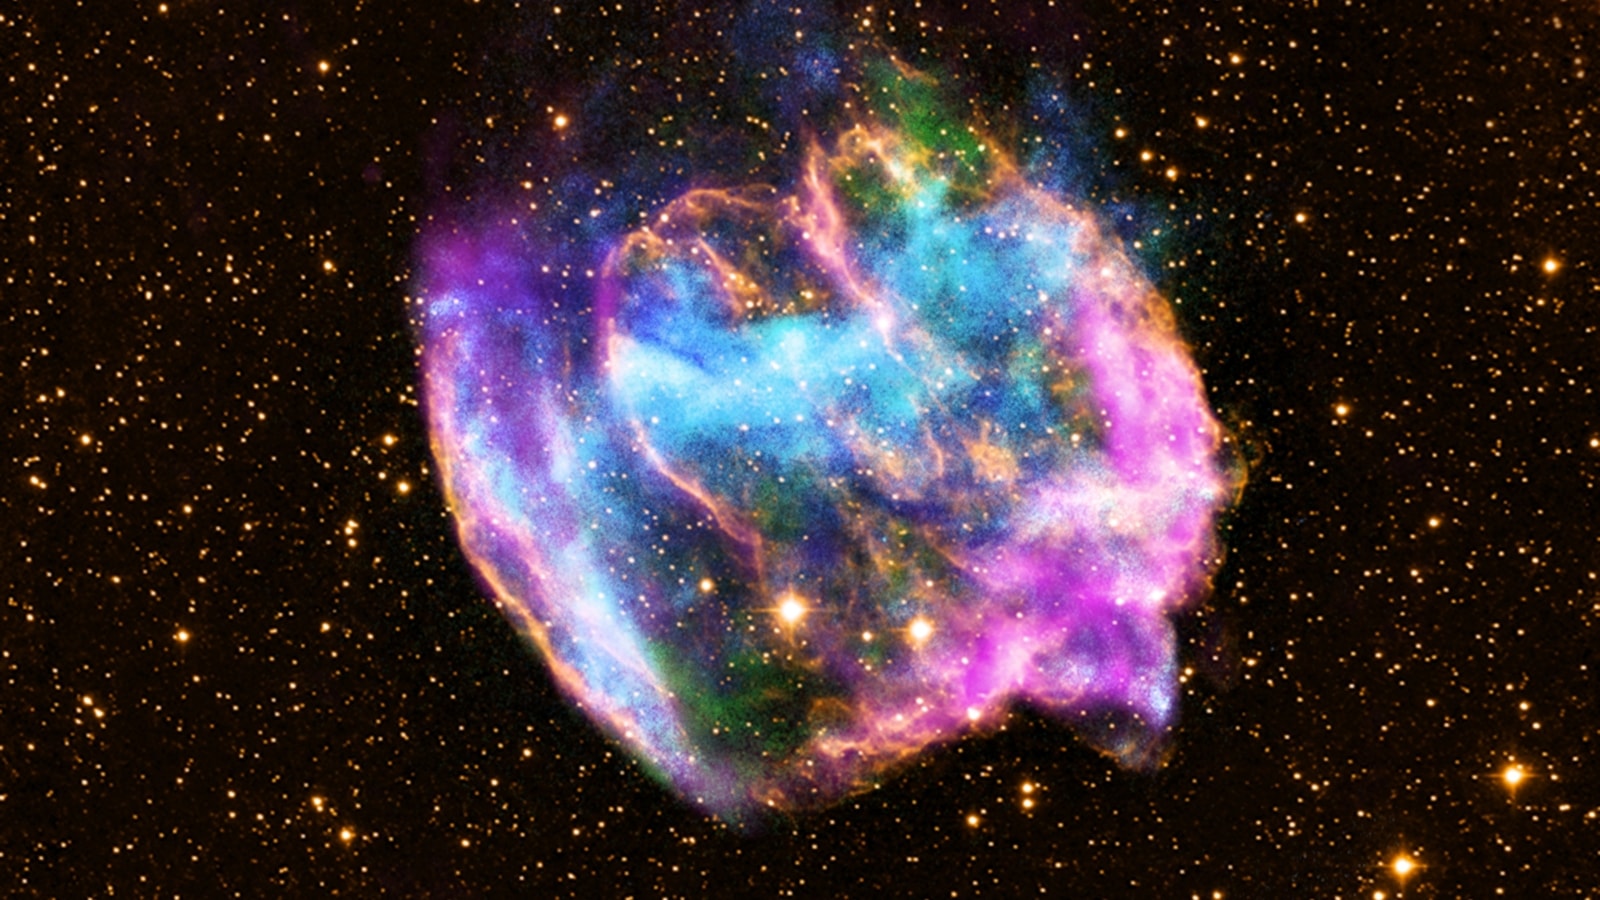 Star wreck source of extreme cosmic particles, NASA's Fermi Telescope finds  out